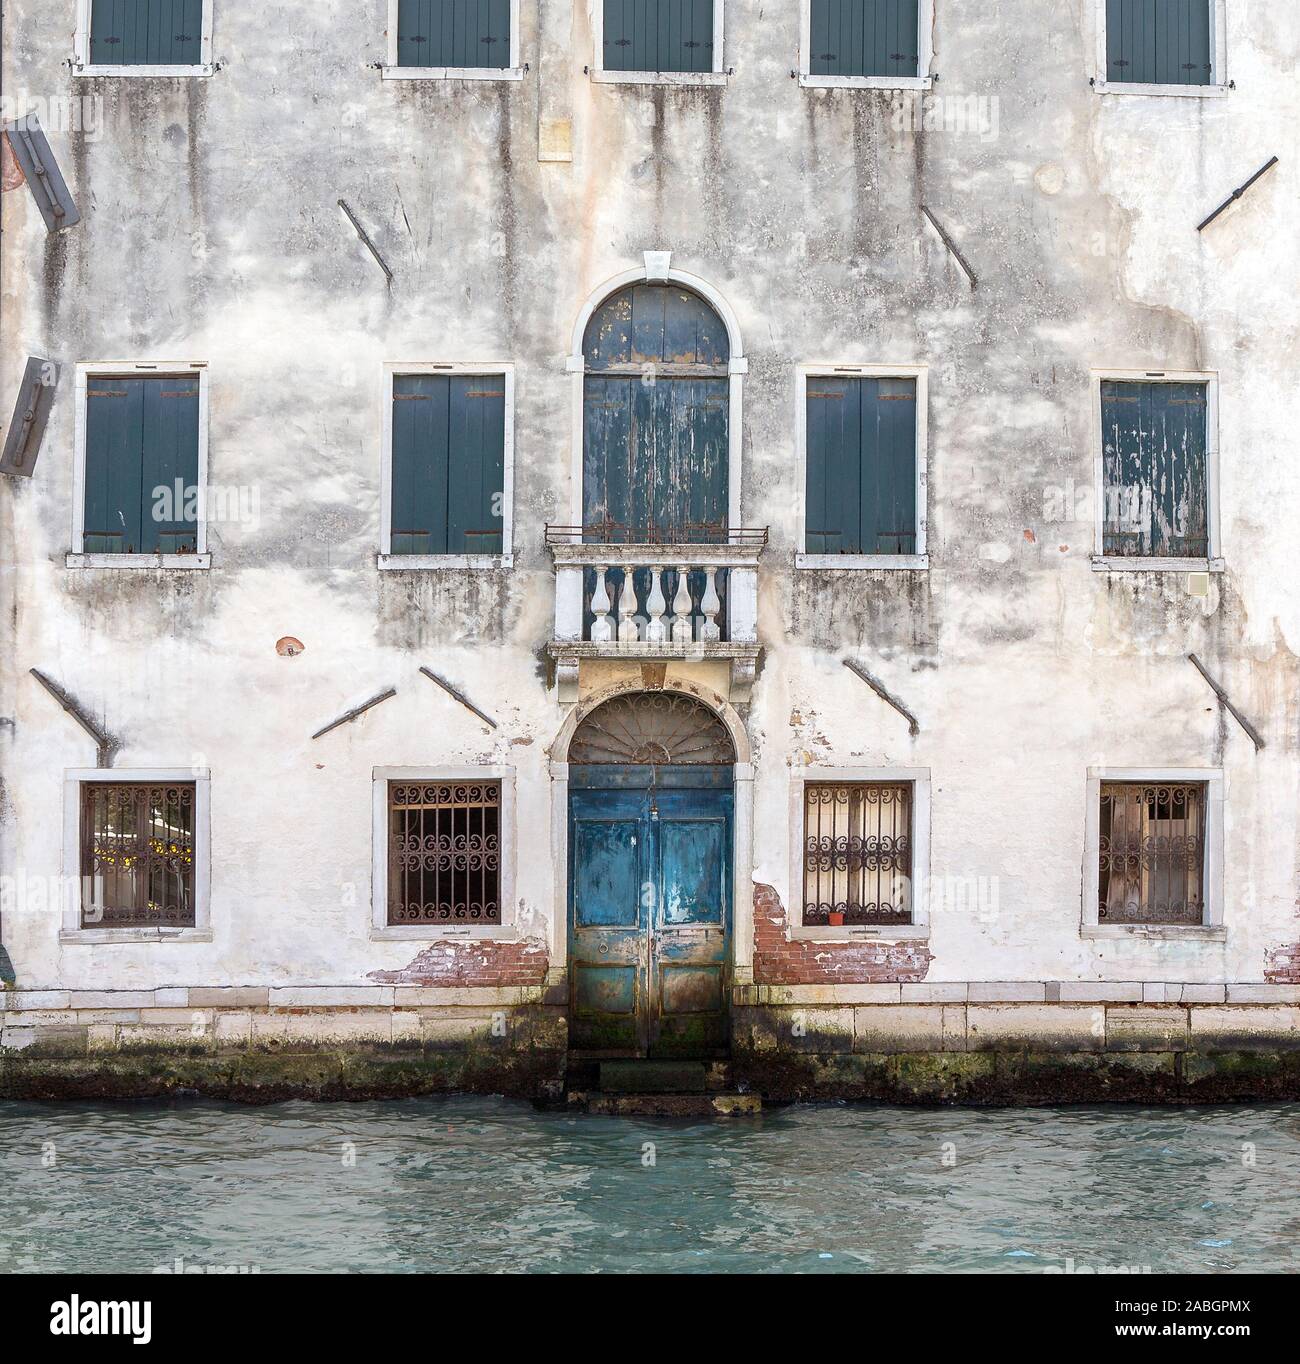 Partial view of old traditional abandoned building facing Grand Canal in Venice, Italy. Old bricks, windows, closed door, water. Stock Photo